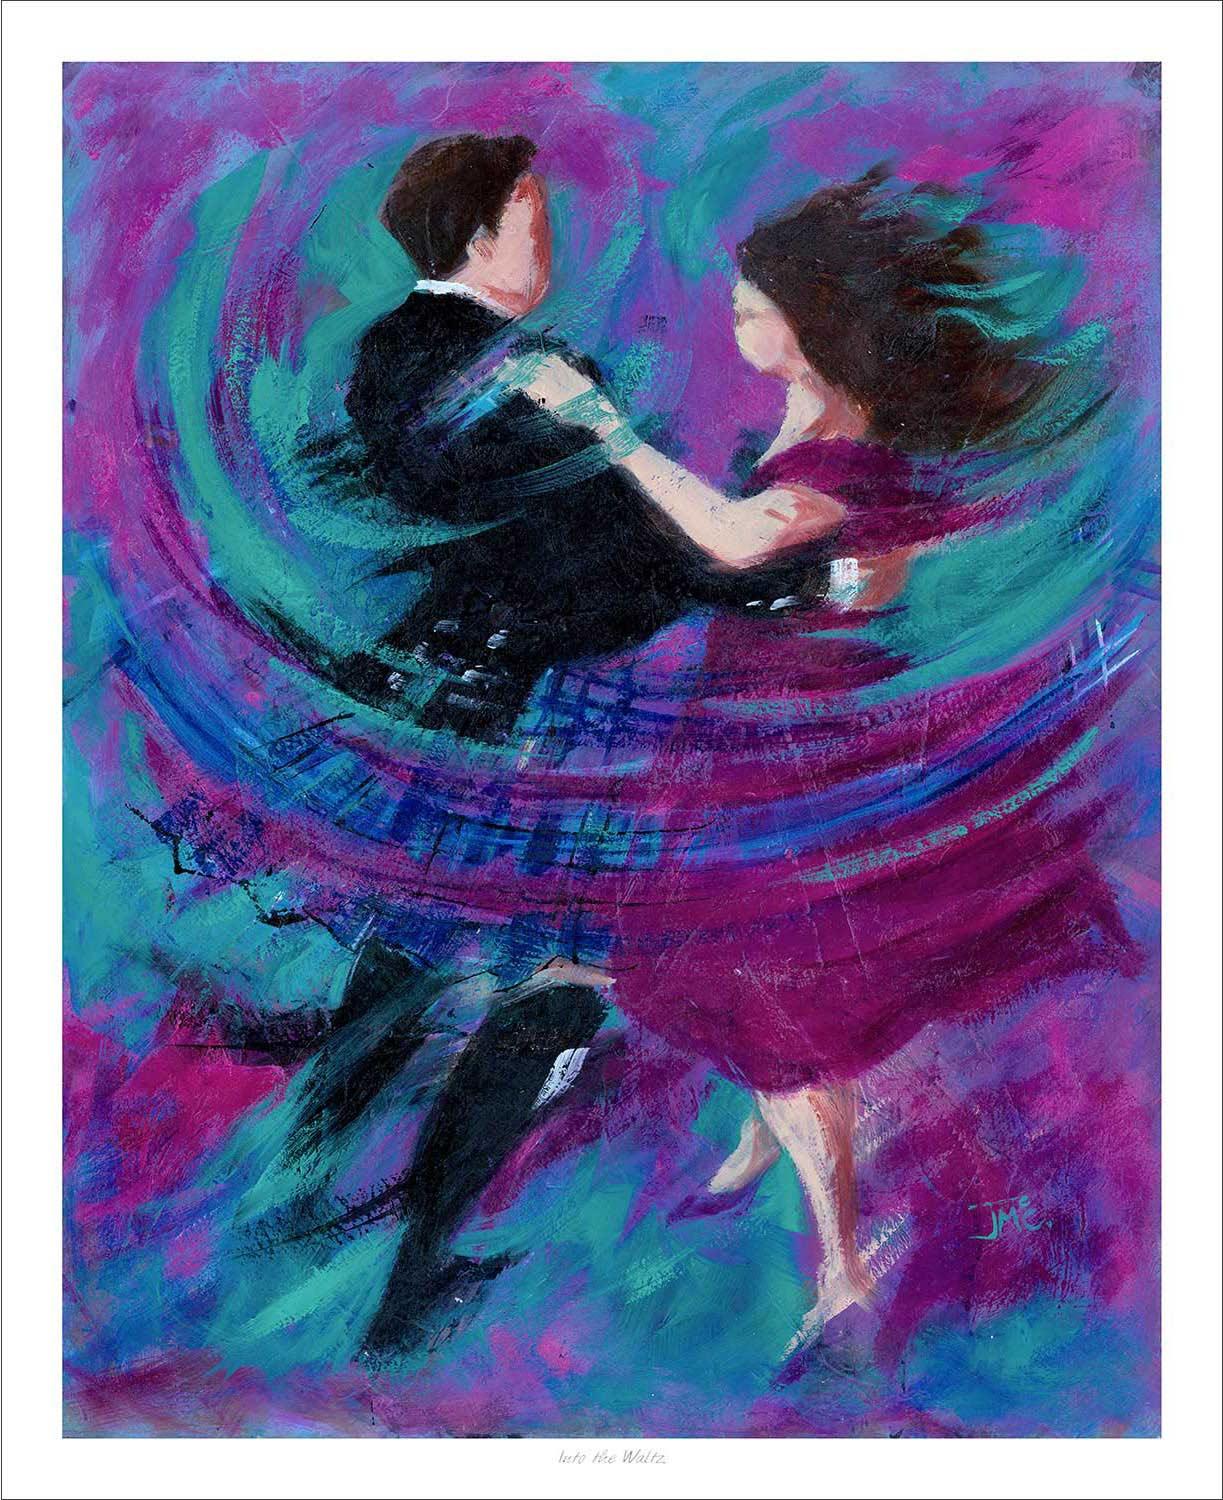 Into the Waltz Art Print from an original painting by artist Janet McCrorie